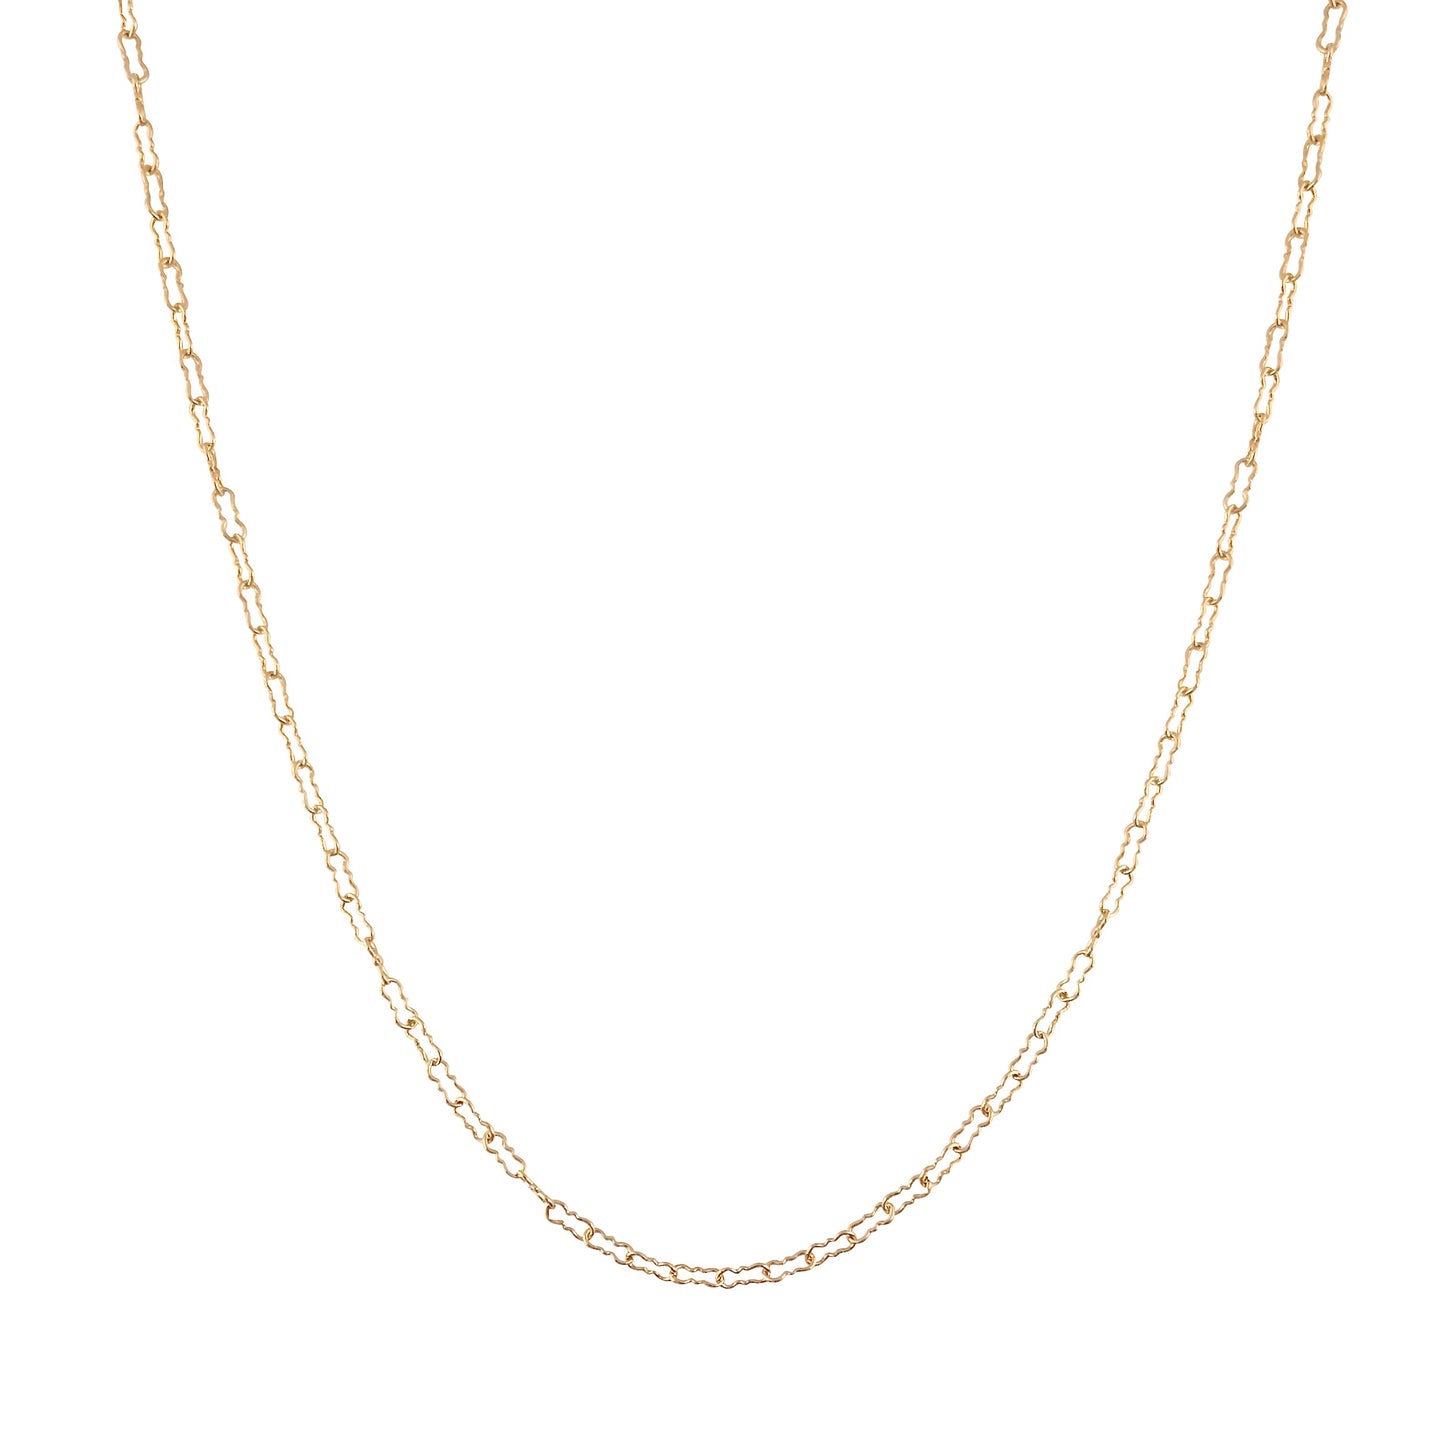 Gold wavy link chain